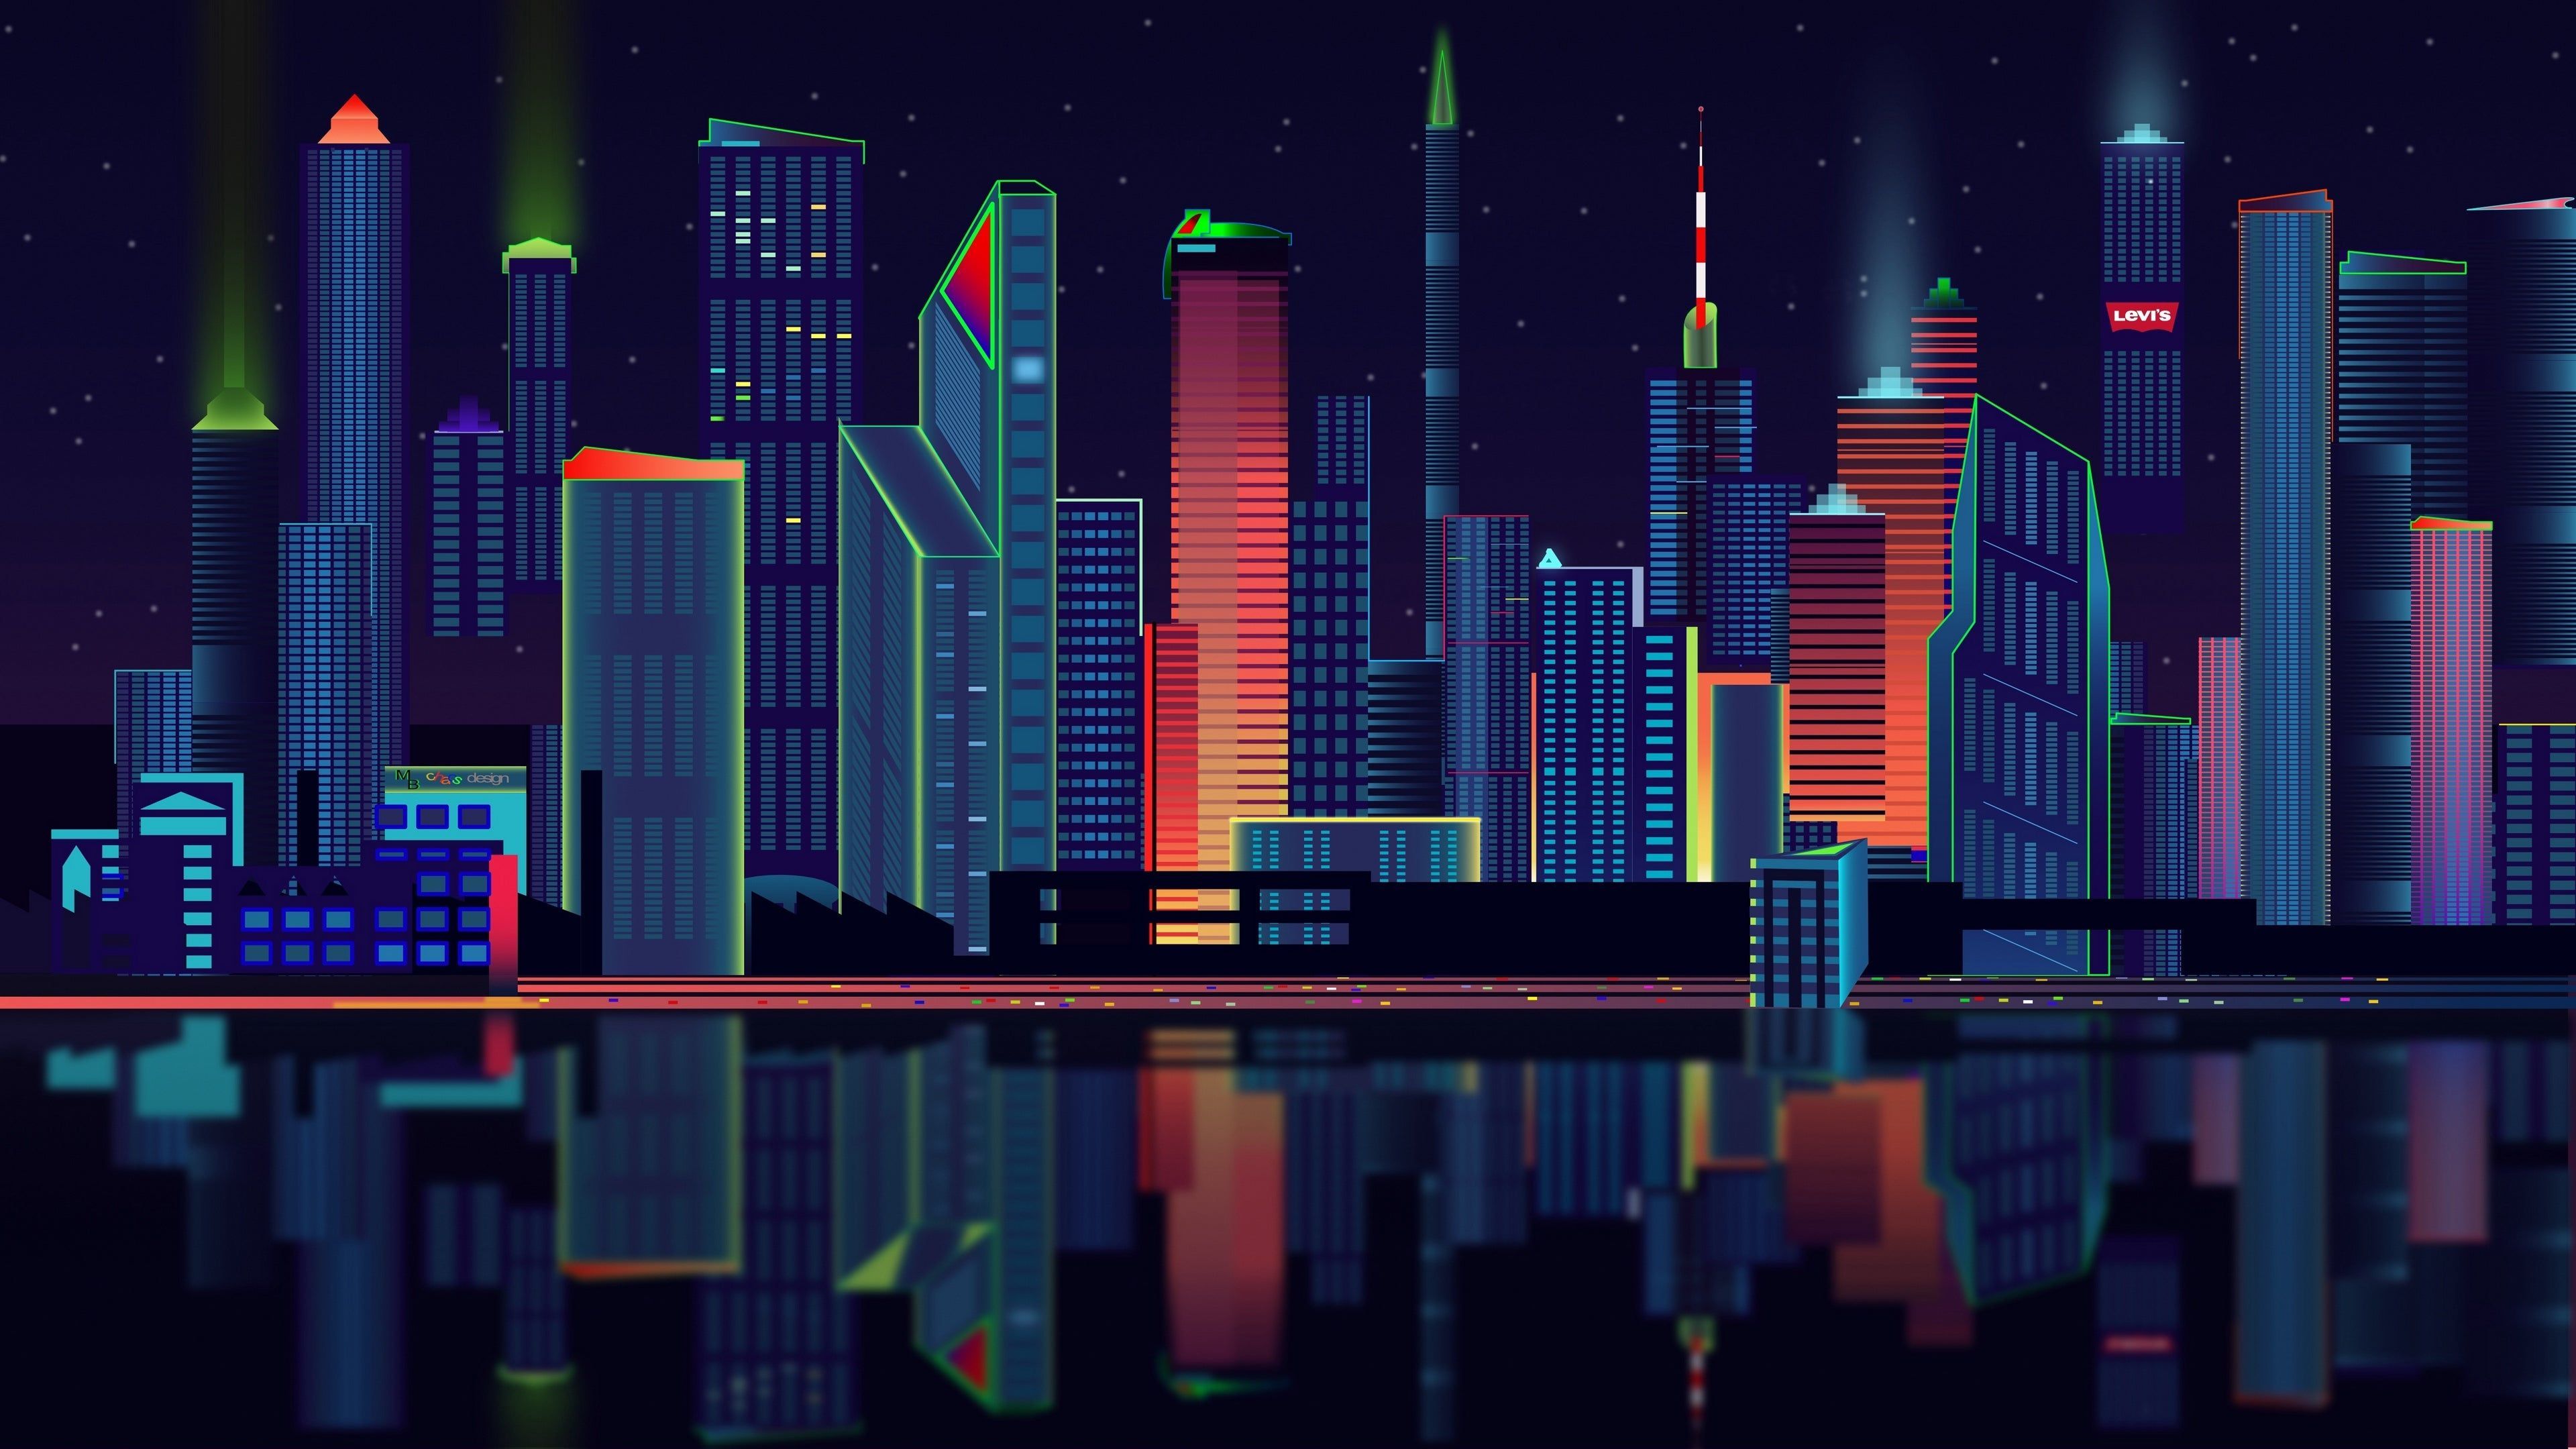 Panorama Vector City Wallpapers